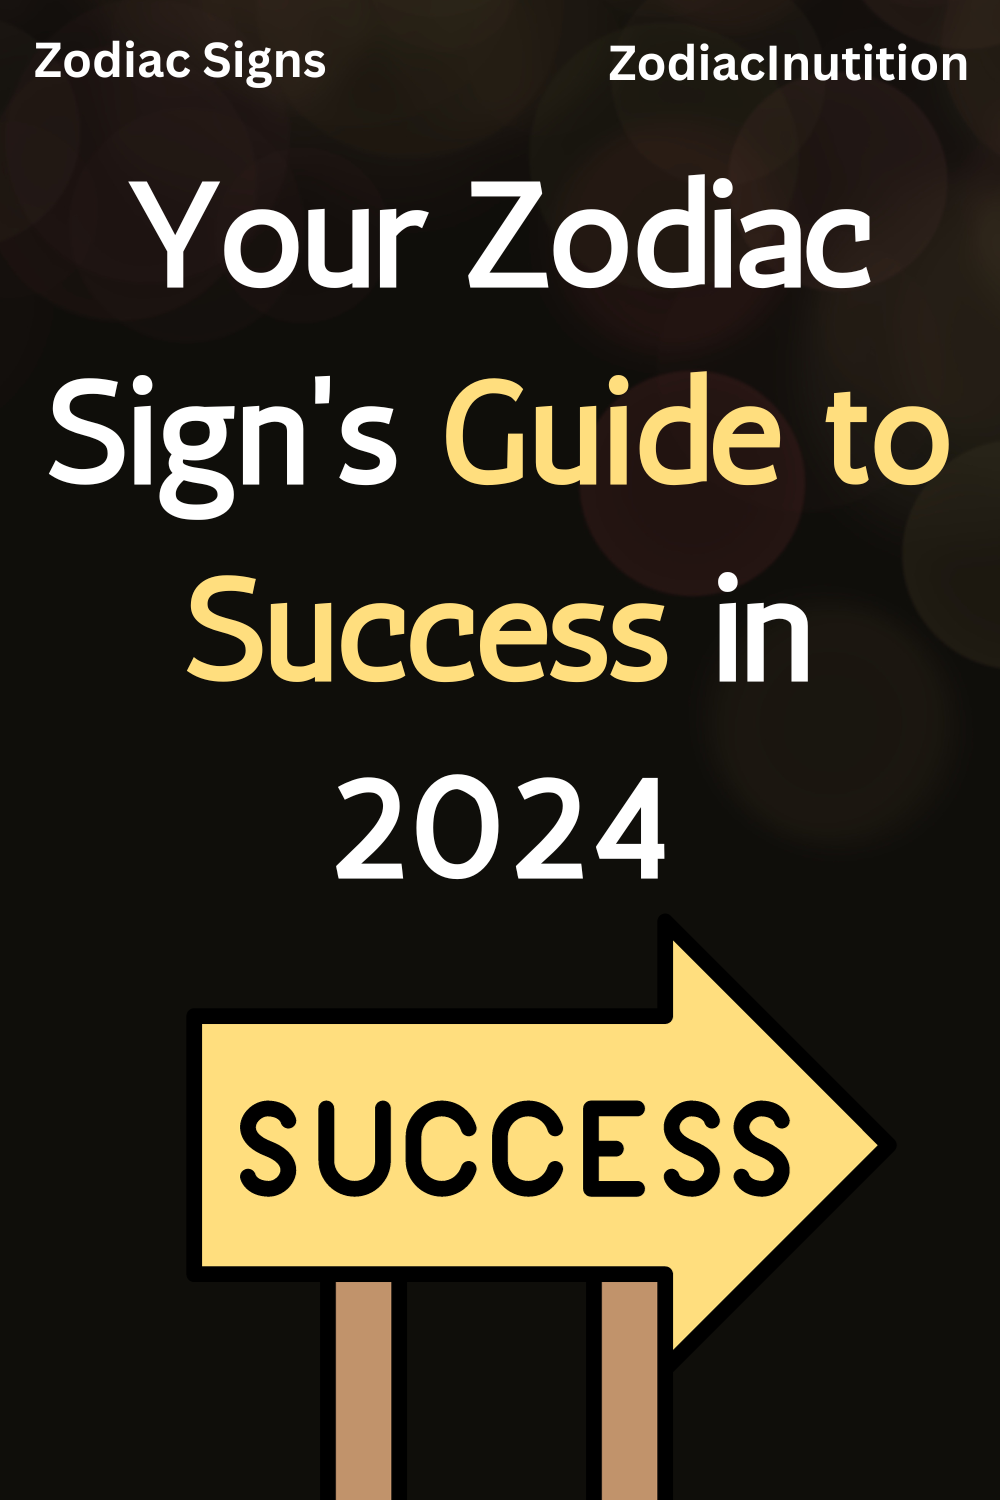 Your Zodiac Sign's Guide to Success in 2024